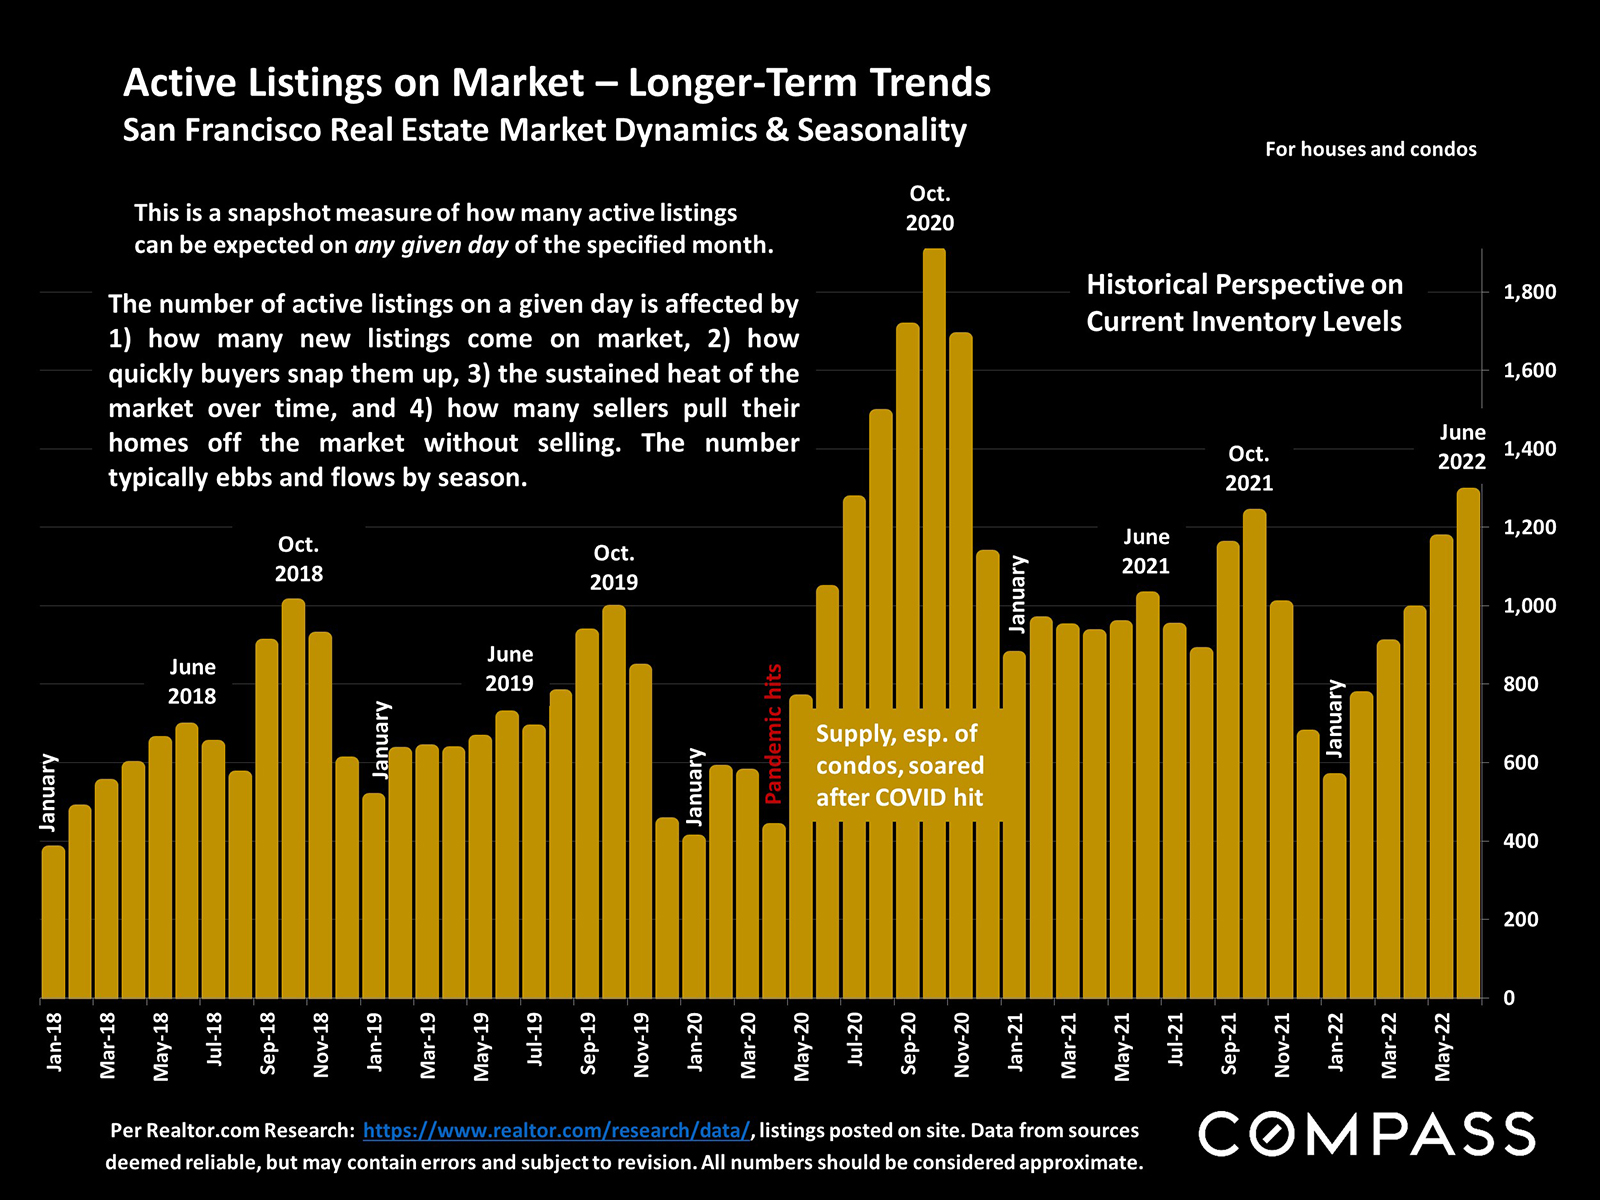 Active Listings Longer Terms